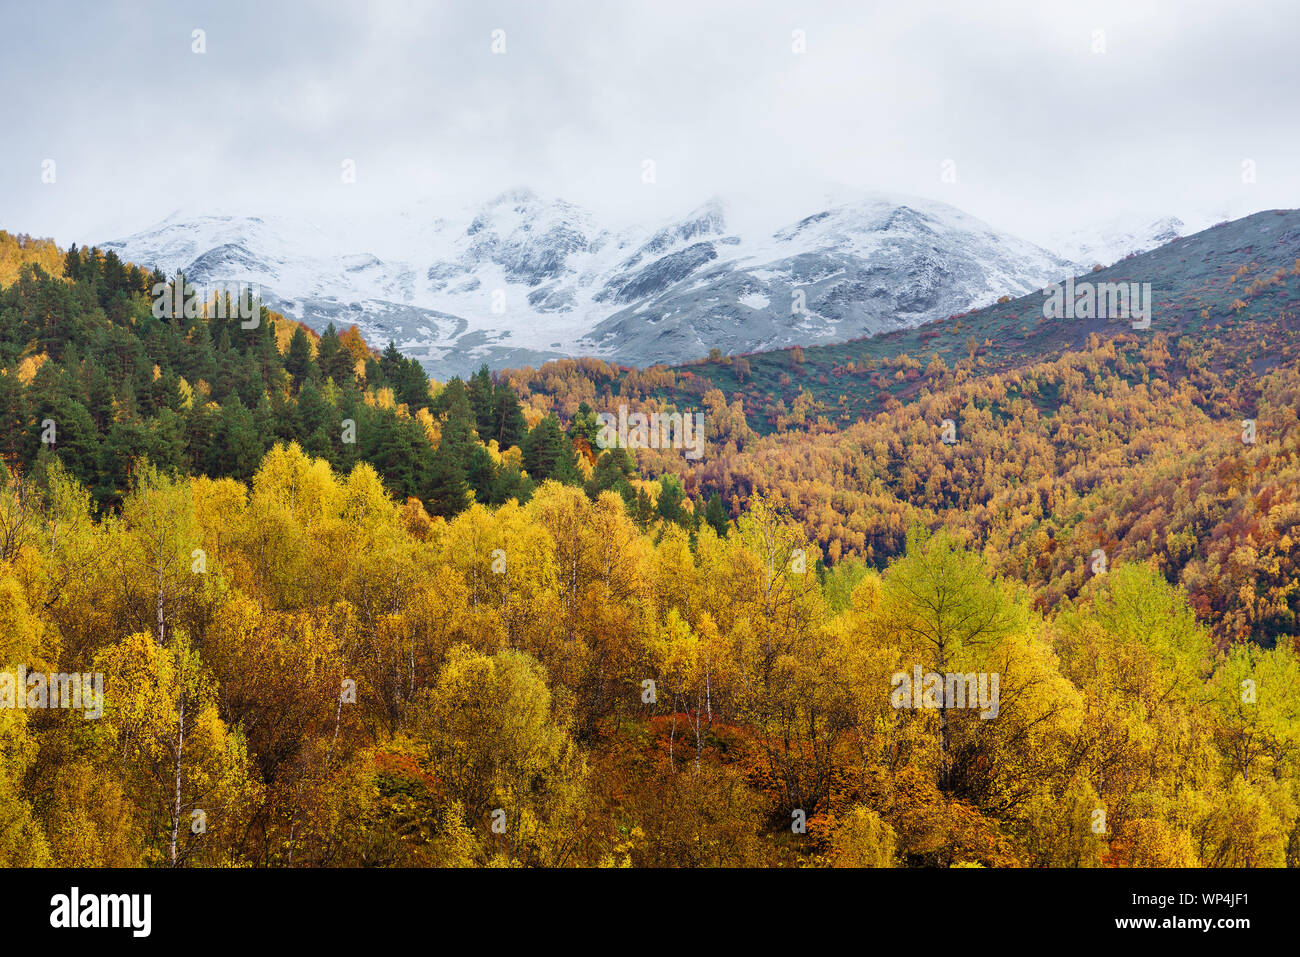 Beautiful birch forest on the mountain slopes. Autumn landscape with yellow trees and peaks with snow. Stock Photo